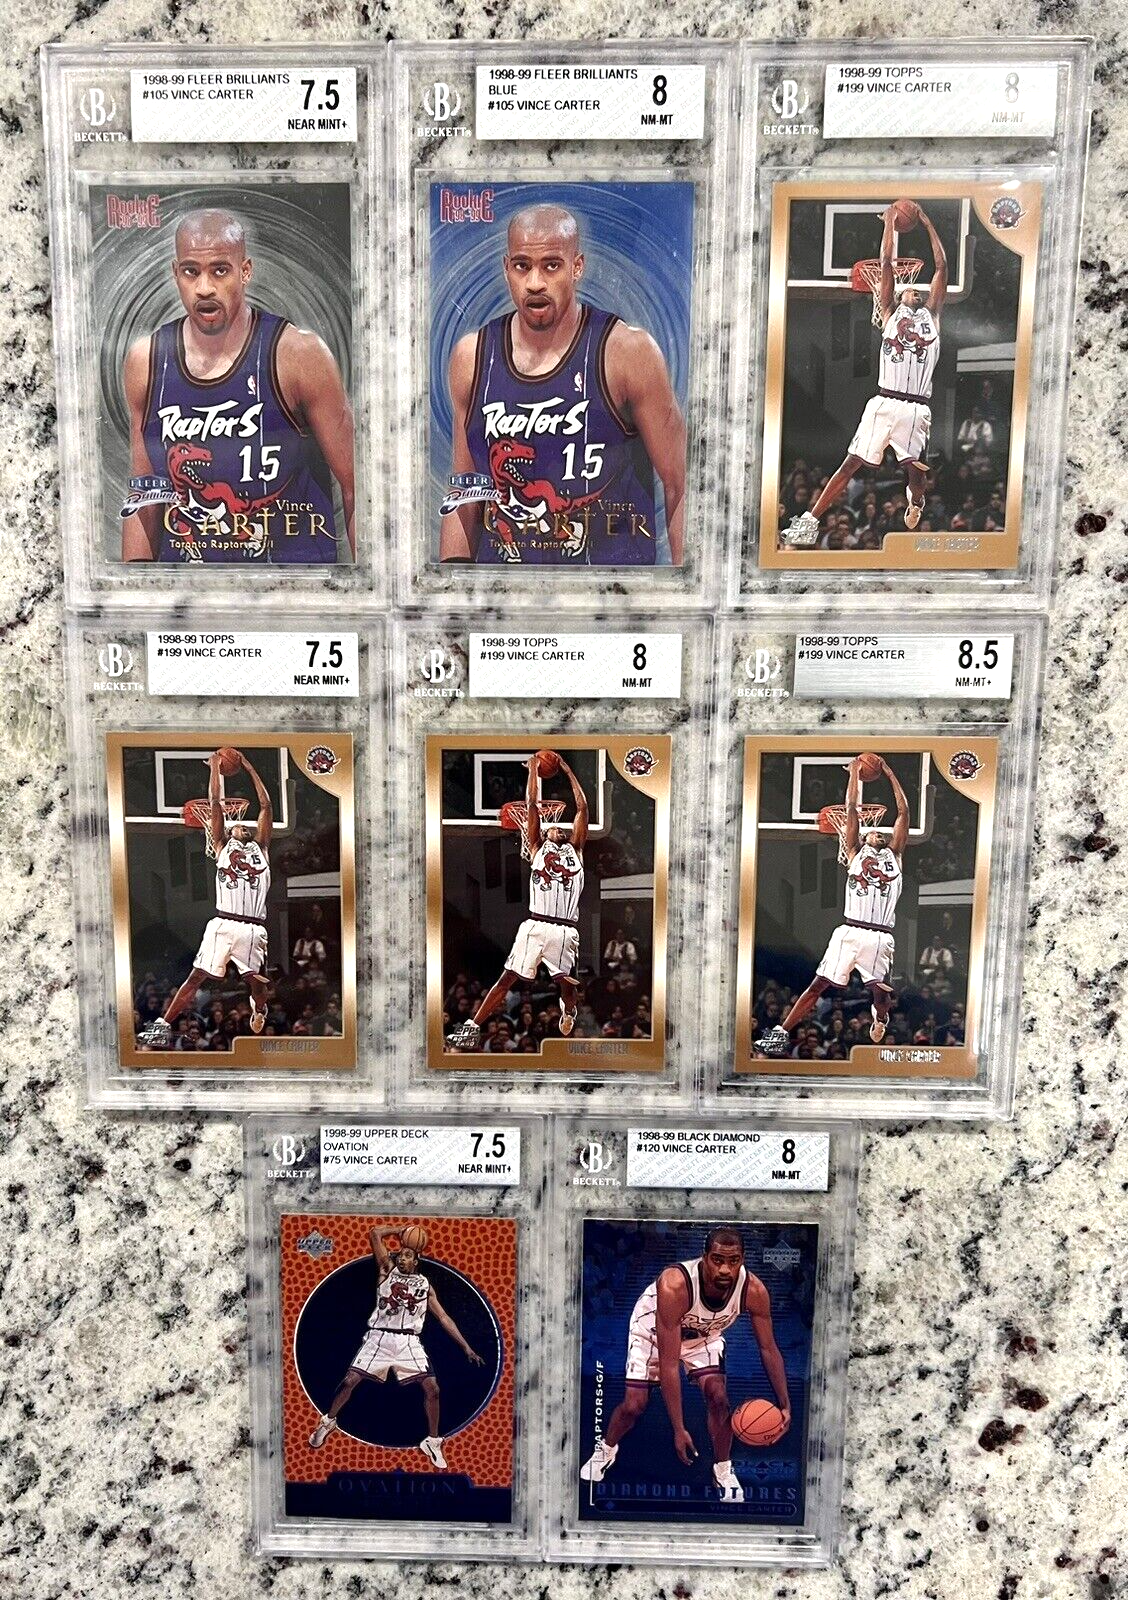 1998-99 Vince Carter Toronto Raptors RC (Rookie Card)(Graded 9, Various Grading Companies, May Not Get Card In Photo)